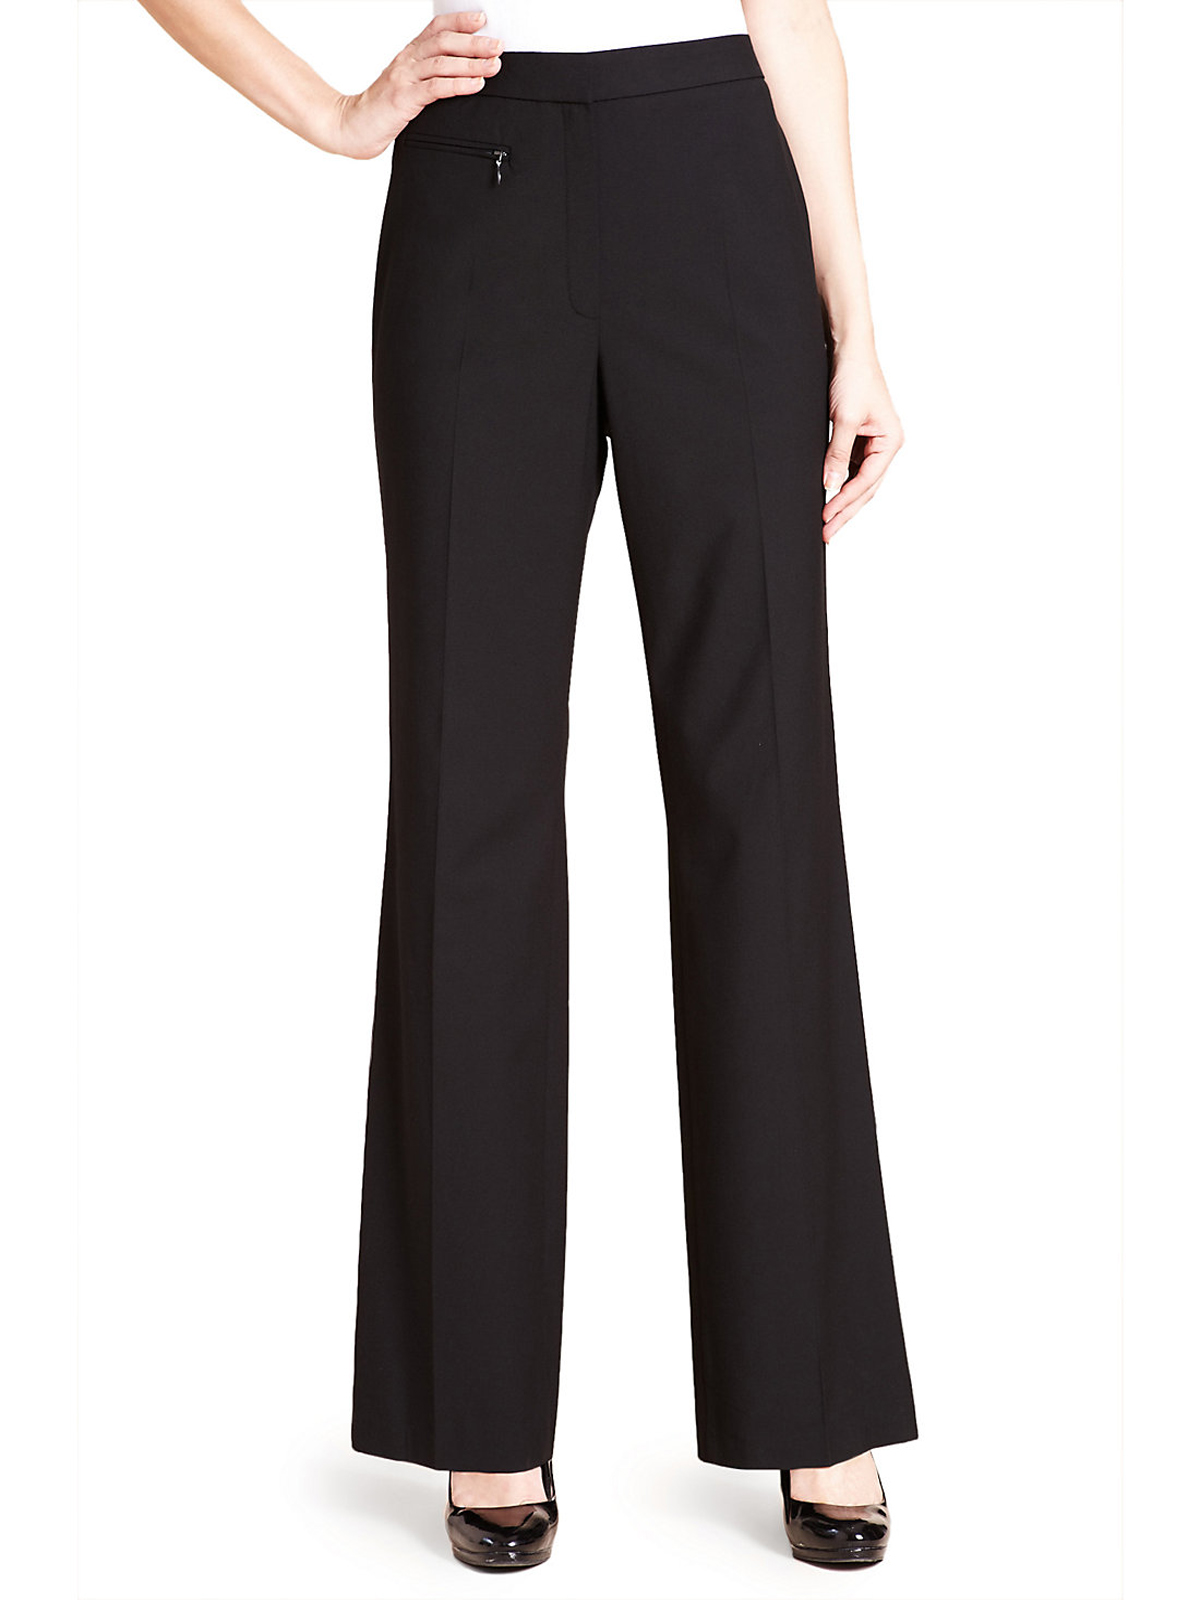 Marks and Spencer - - M&5 ASSORTED Ladies Trousers - Size 14 to 24